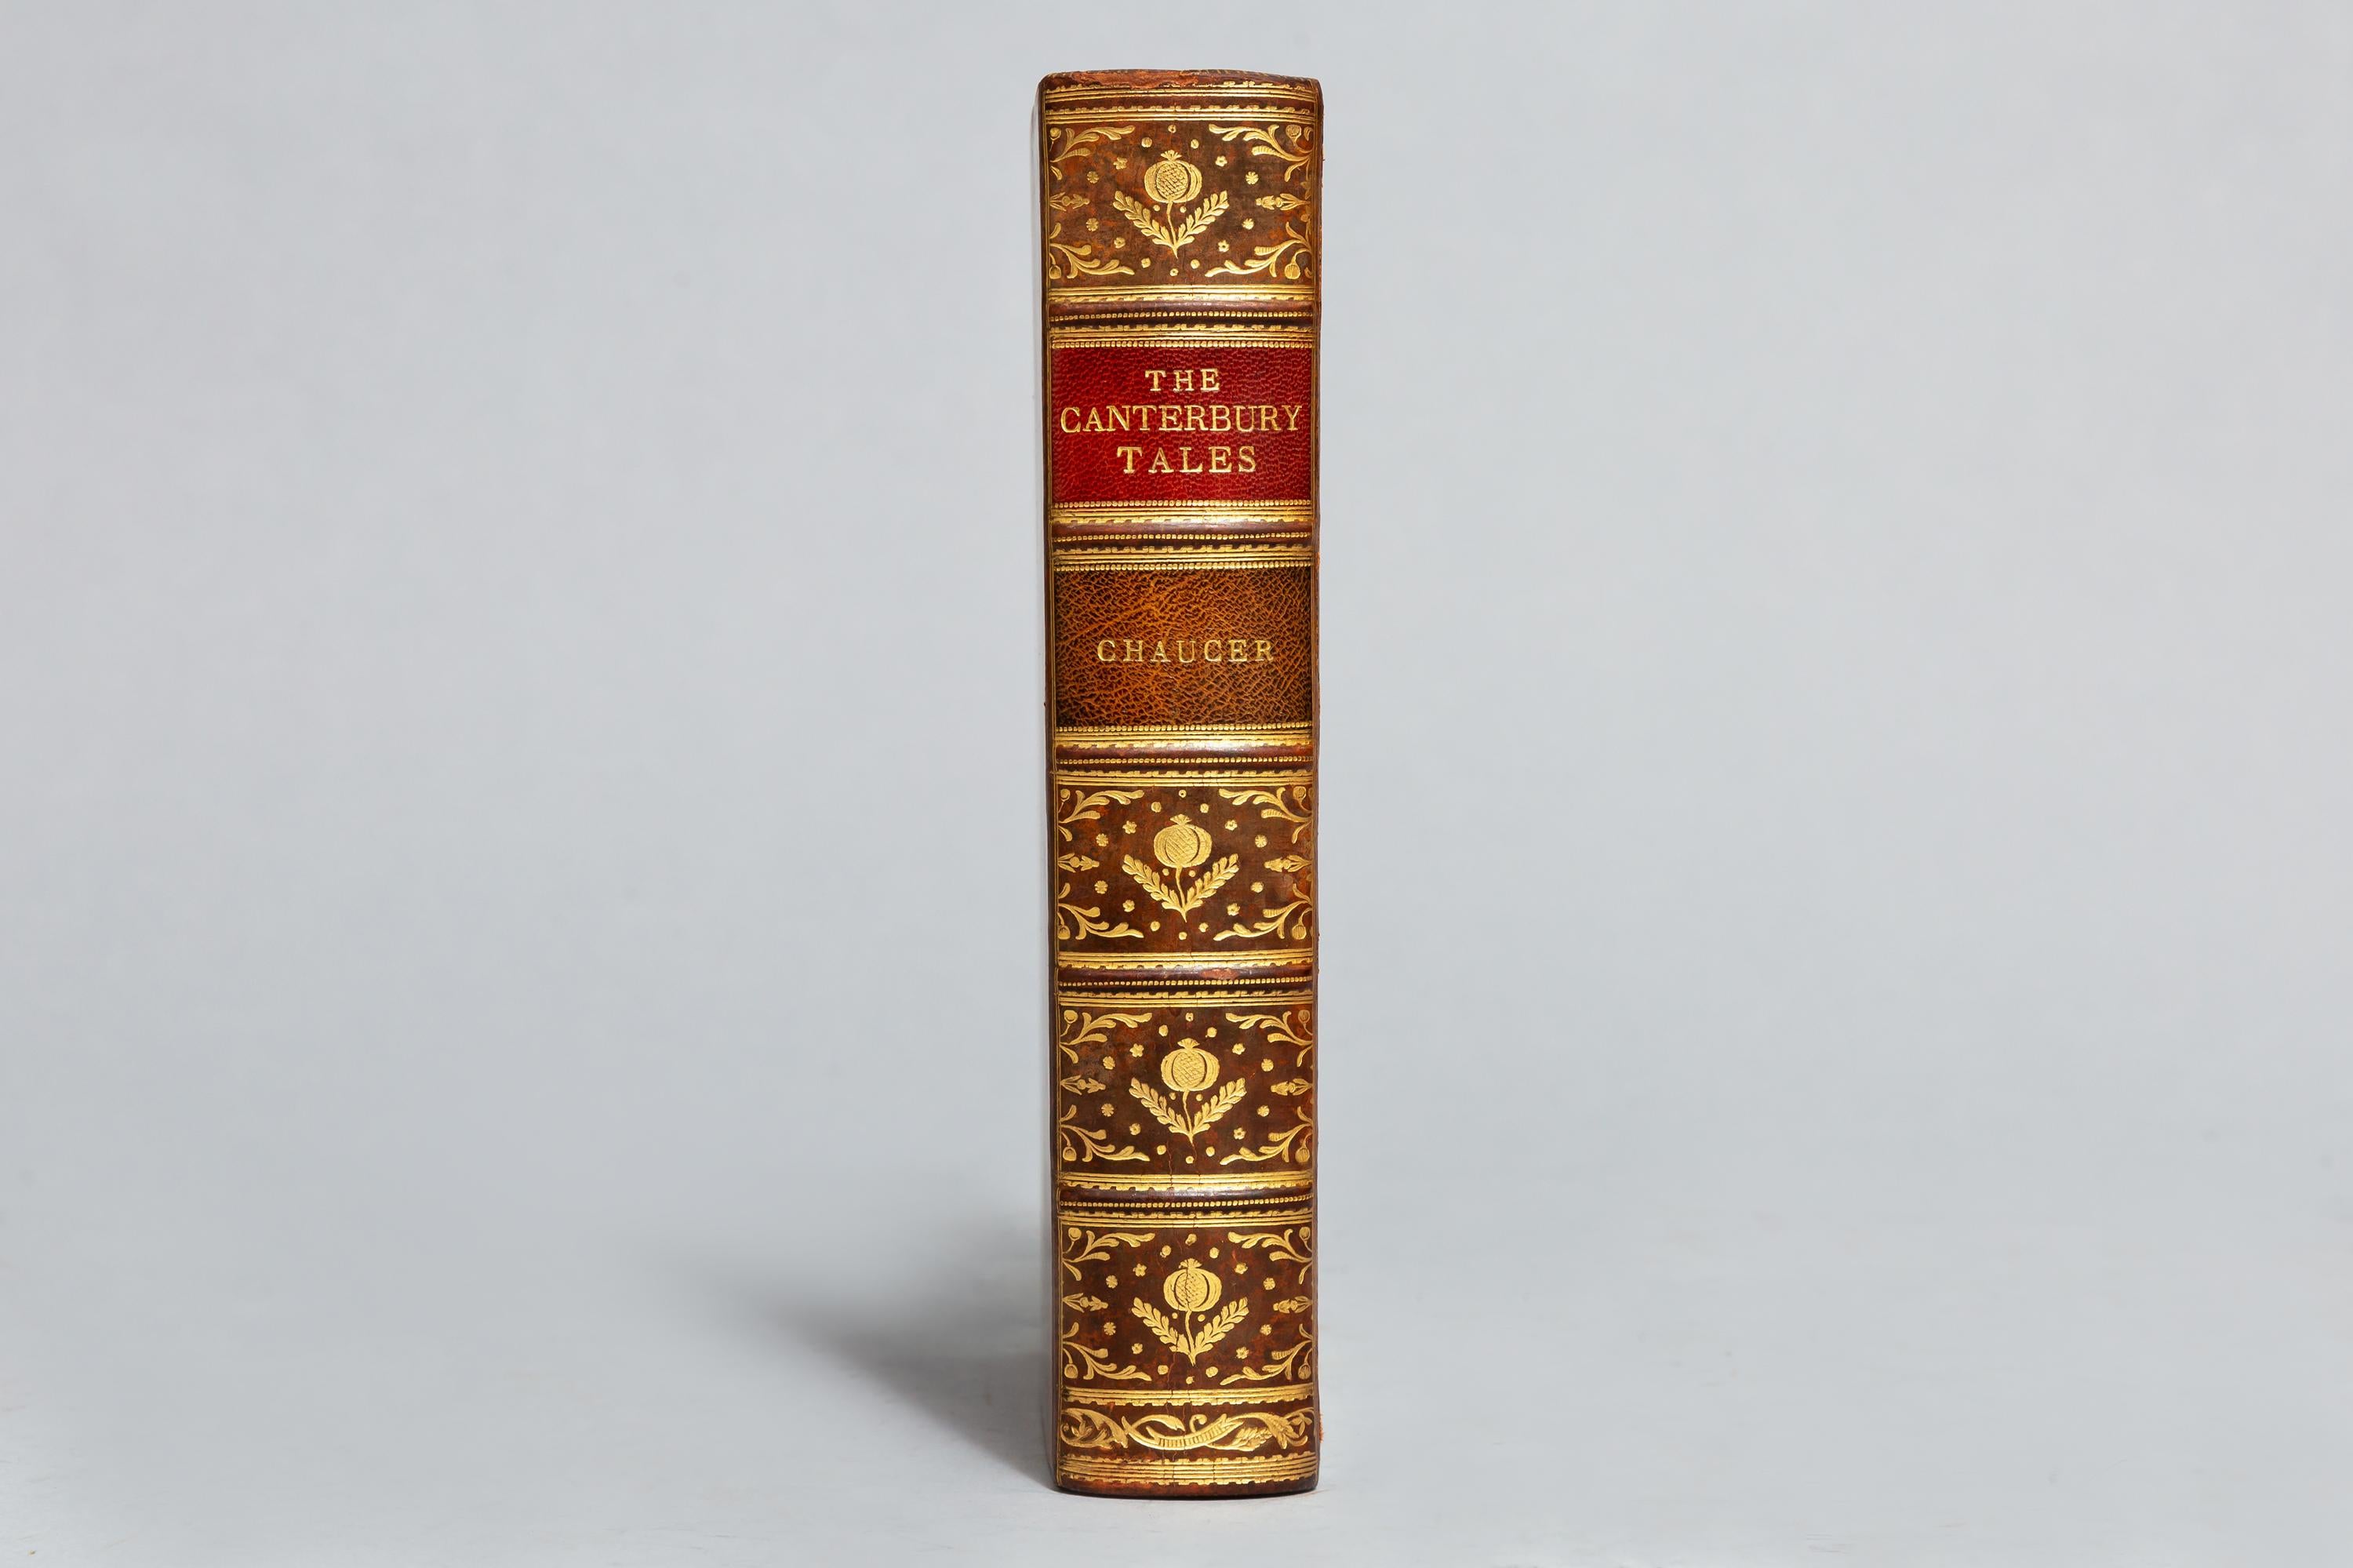 Illustrated in color by W. Russell Flint.

Bound in full tree calf by Riviere, all edges gilt, raised bands, ornate gilt on spine.
Published: London: Jonathan Cape & The Medici Society Ltd. 1928.